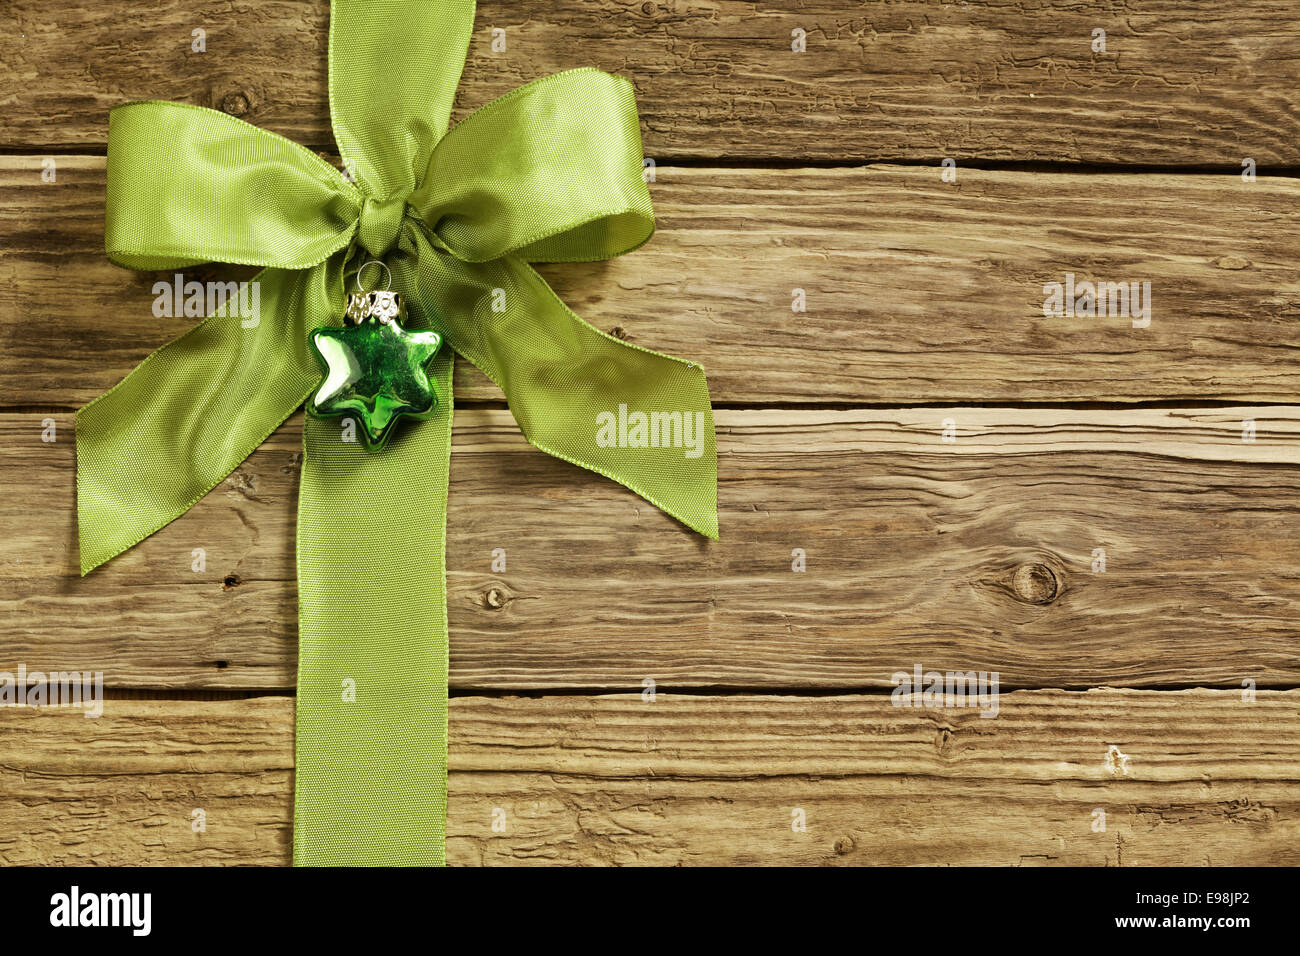 Green Ribbon Stock Photos and Pictures - 935,048 Images